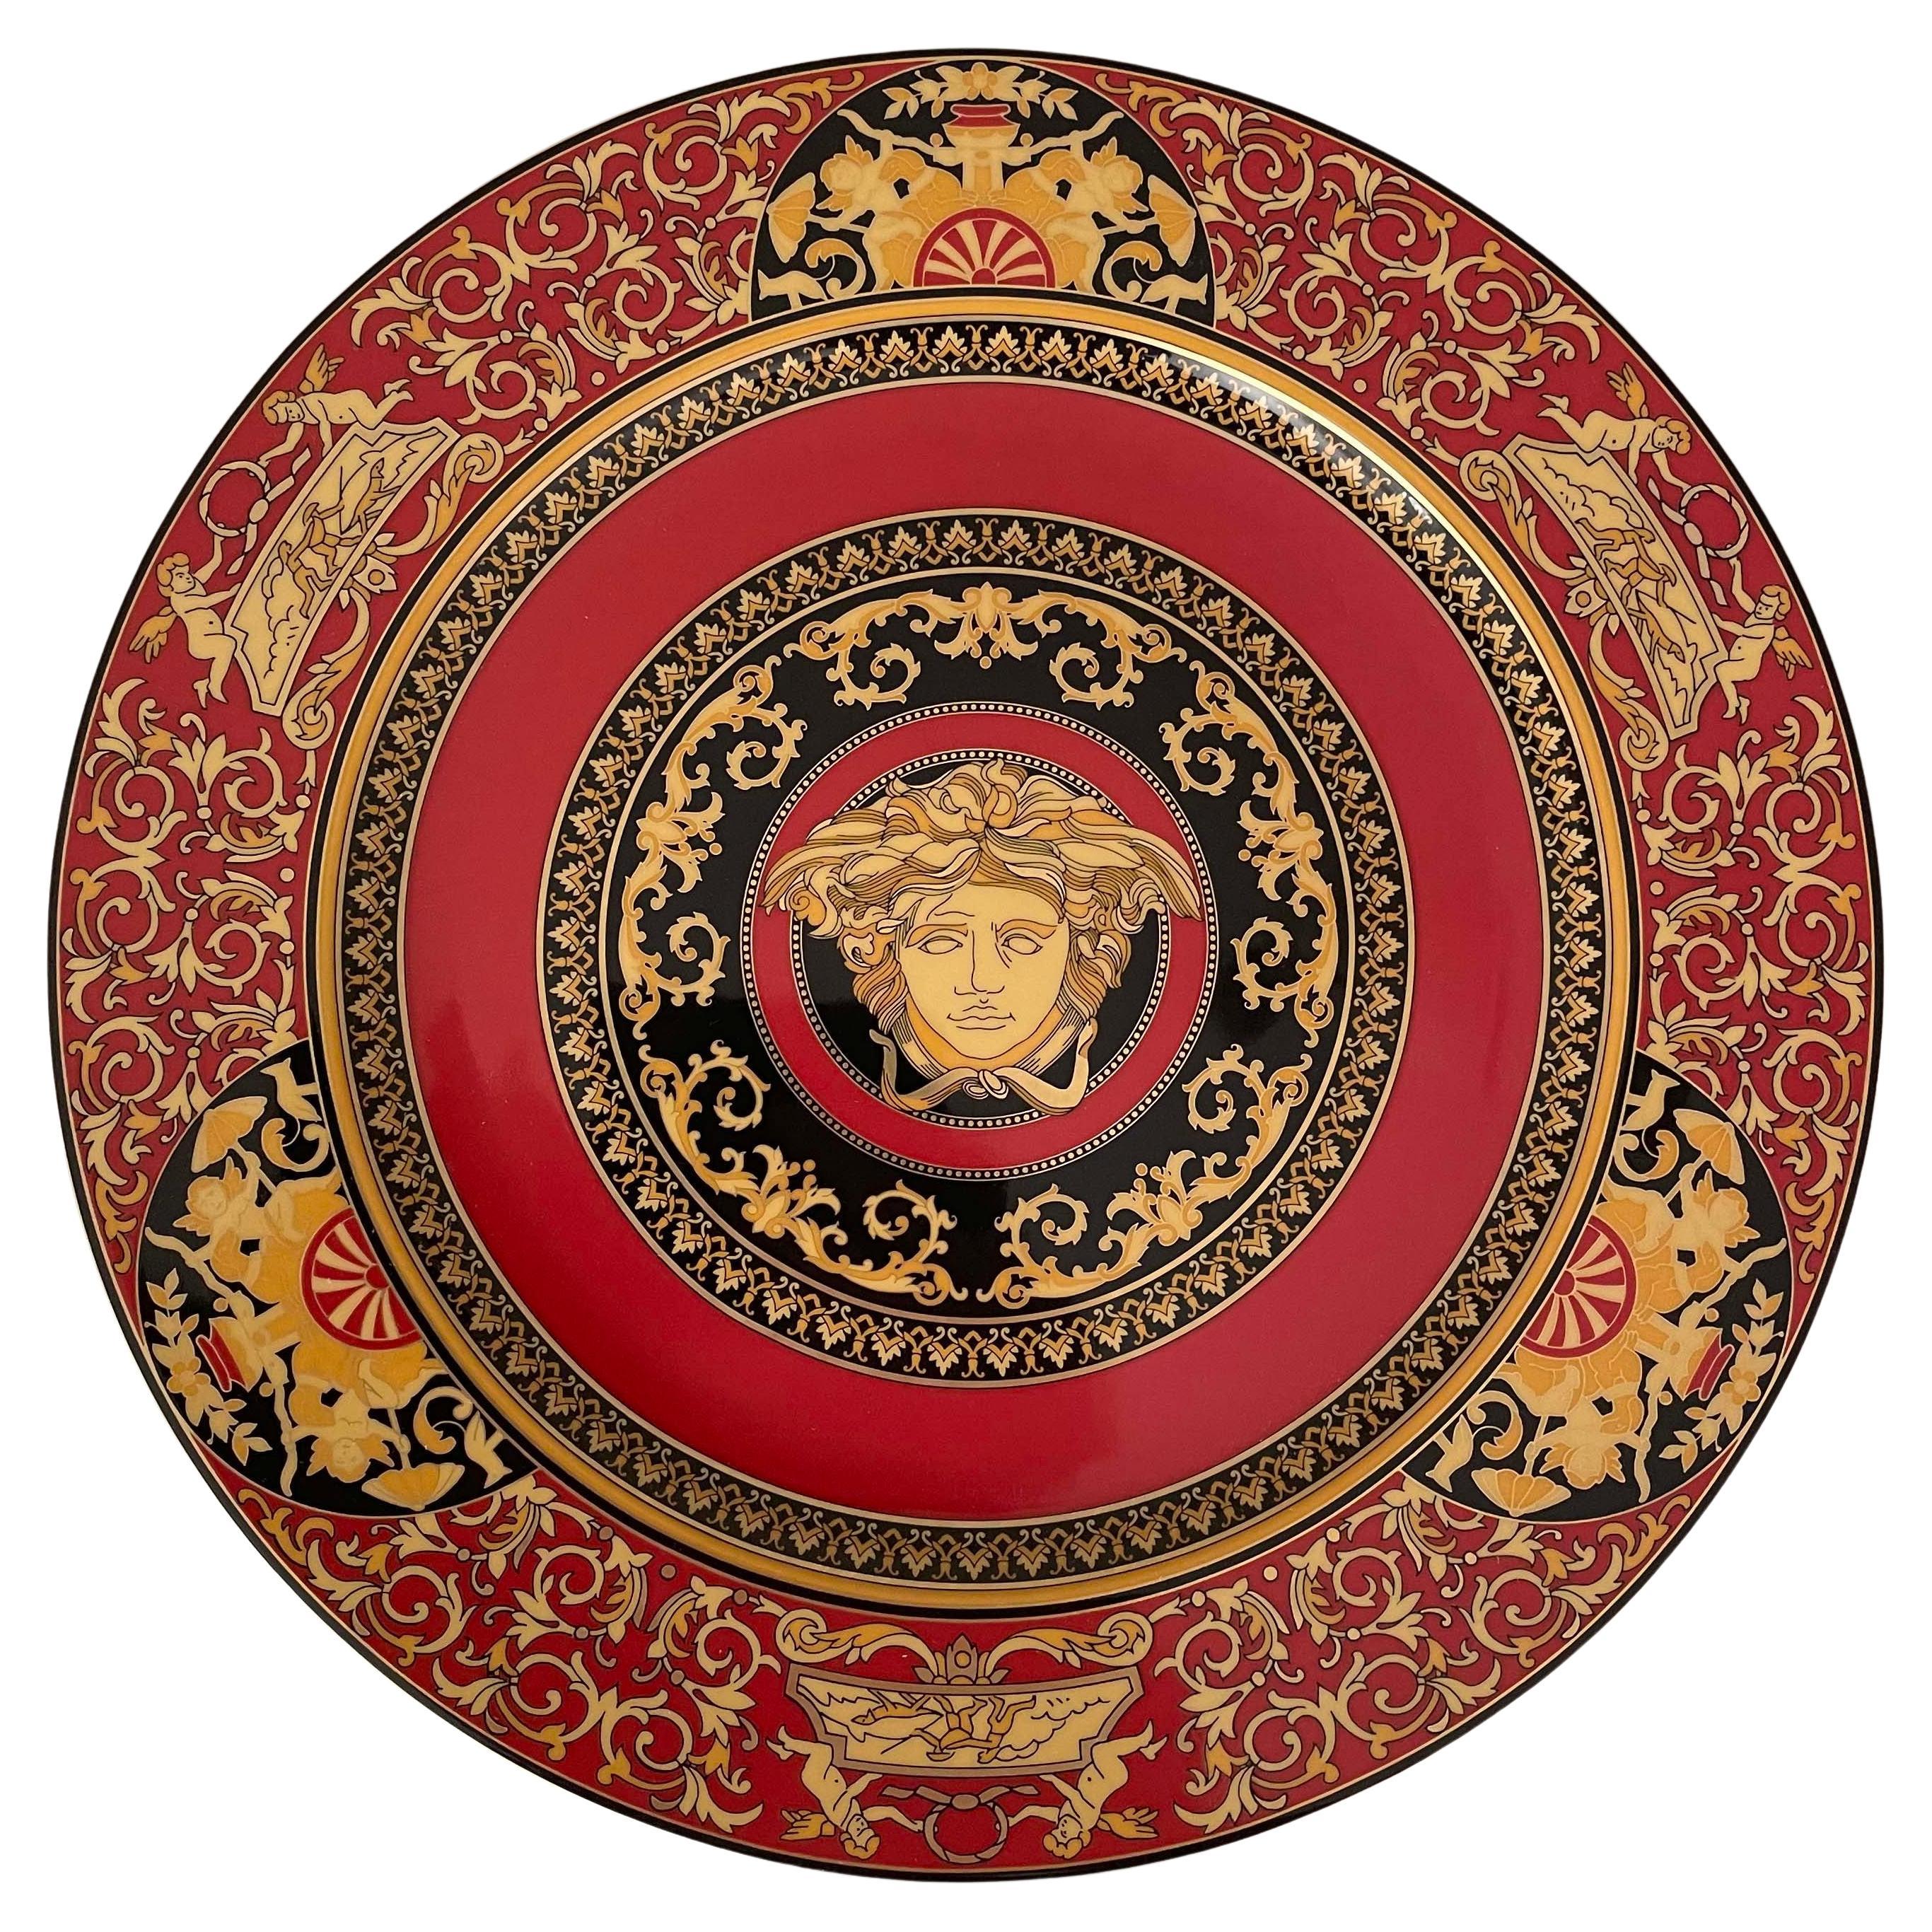  Red Versace Porcelain Medusa Display Plate By Rosenthal, 20th Century